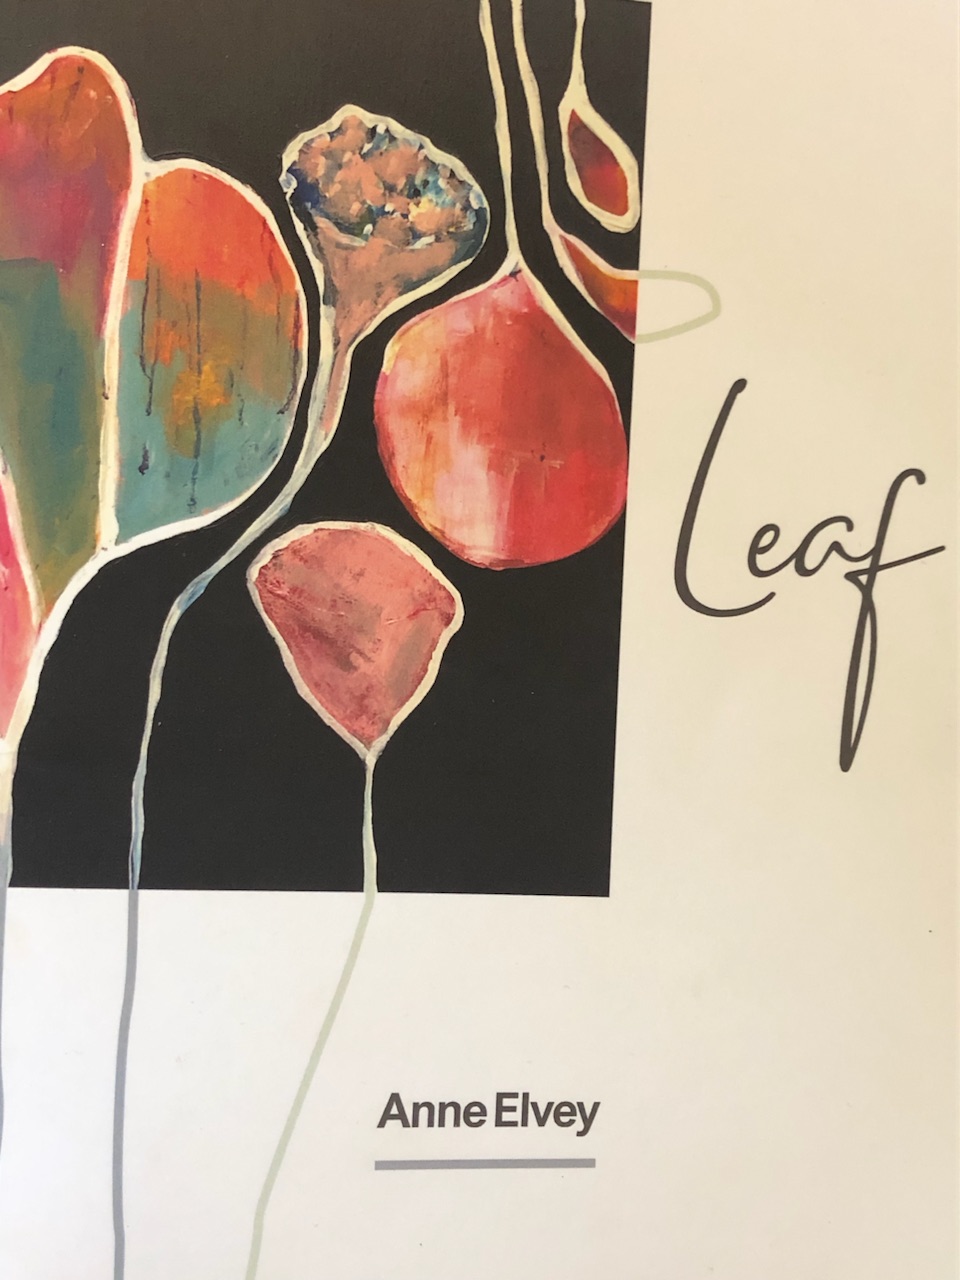 Leaf, a book of ecopoetics by Anne Elvey